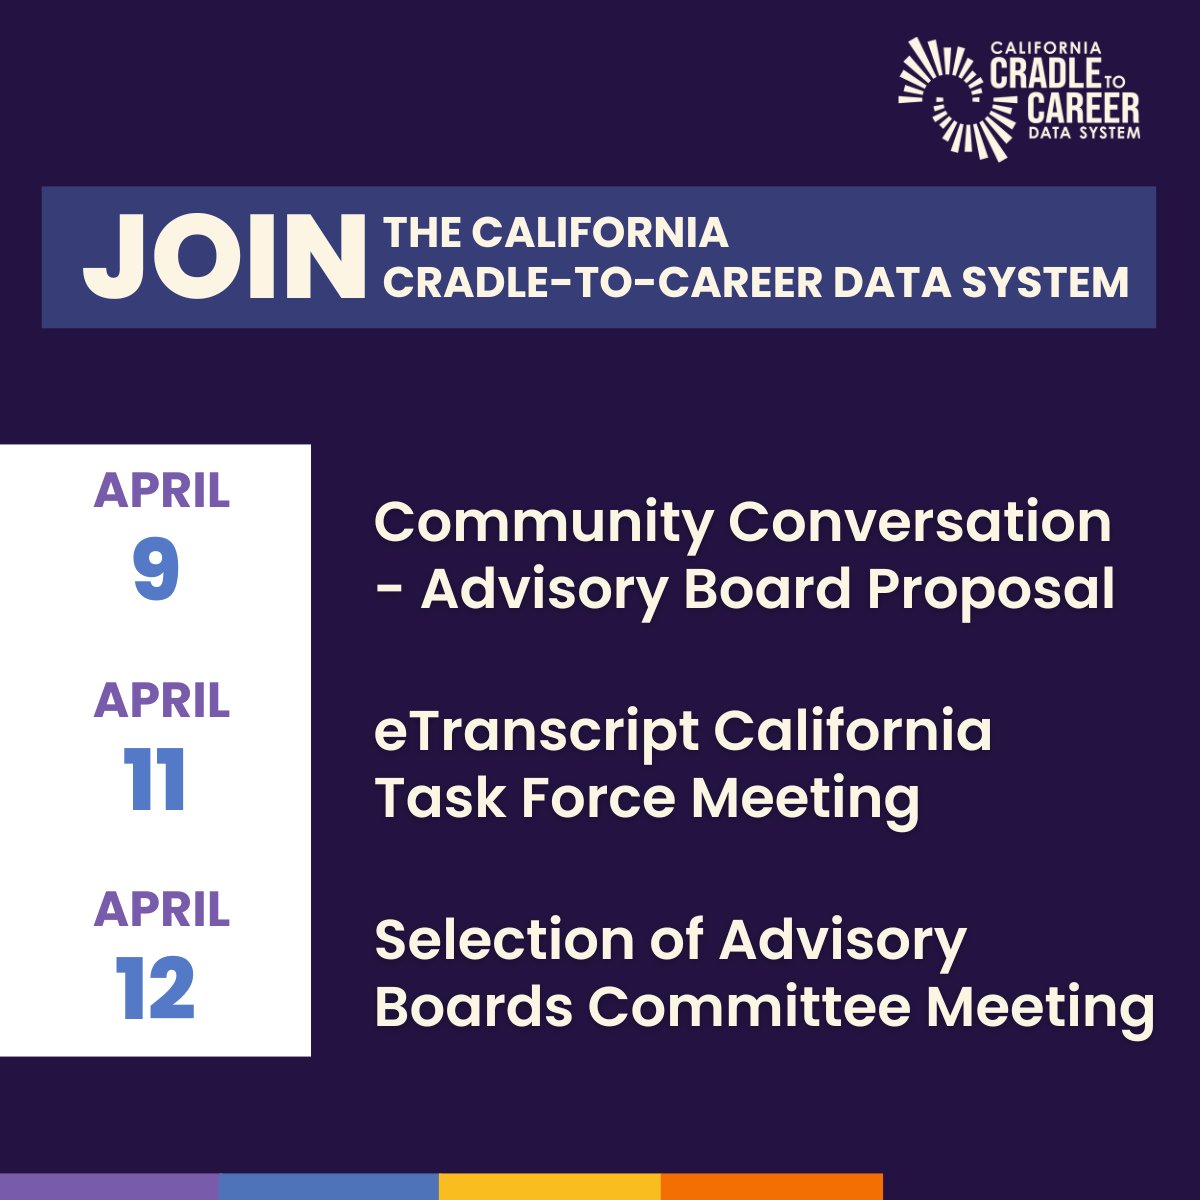 Mark your calendars for C2C's upcoming meetings this month! Learn more: c2c.ca.gov/meetings/ 🗓April 9: Community Conversation (virtual) - Advisory Board Proposal Process 🗓April 11: eTranscript California Task Force Meeting 🗓April 12: Selection of Advisory Boards Committee